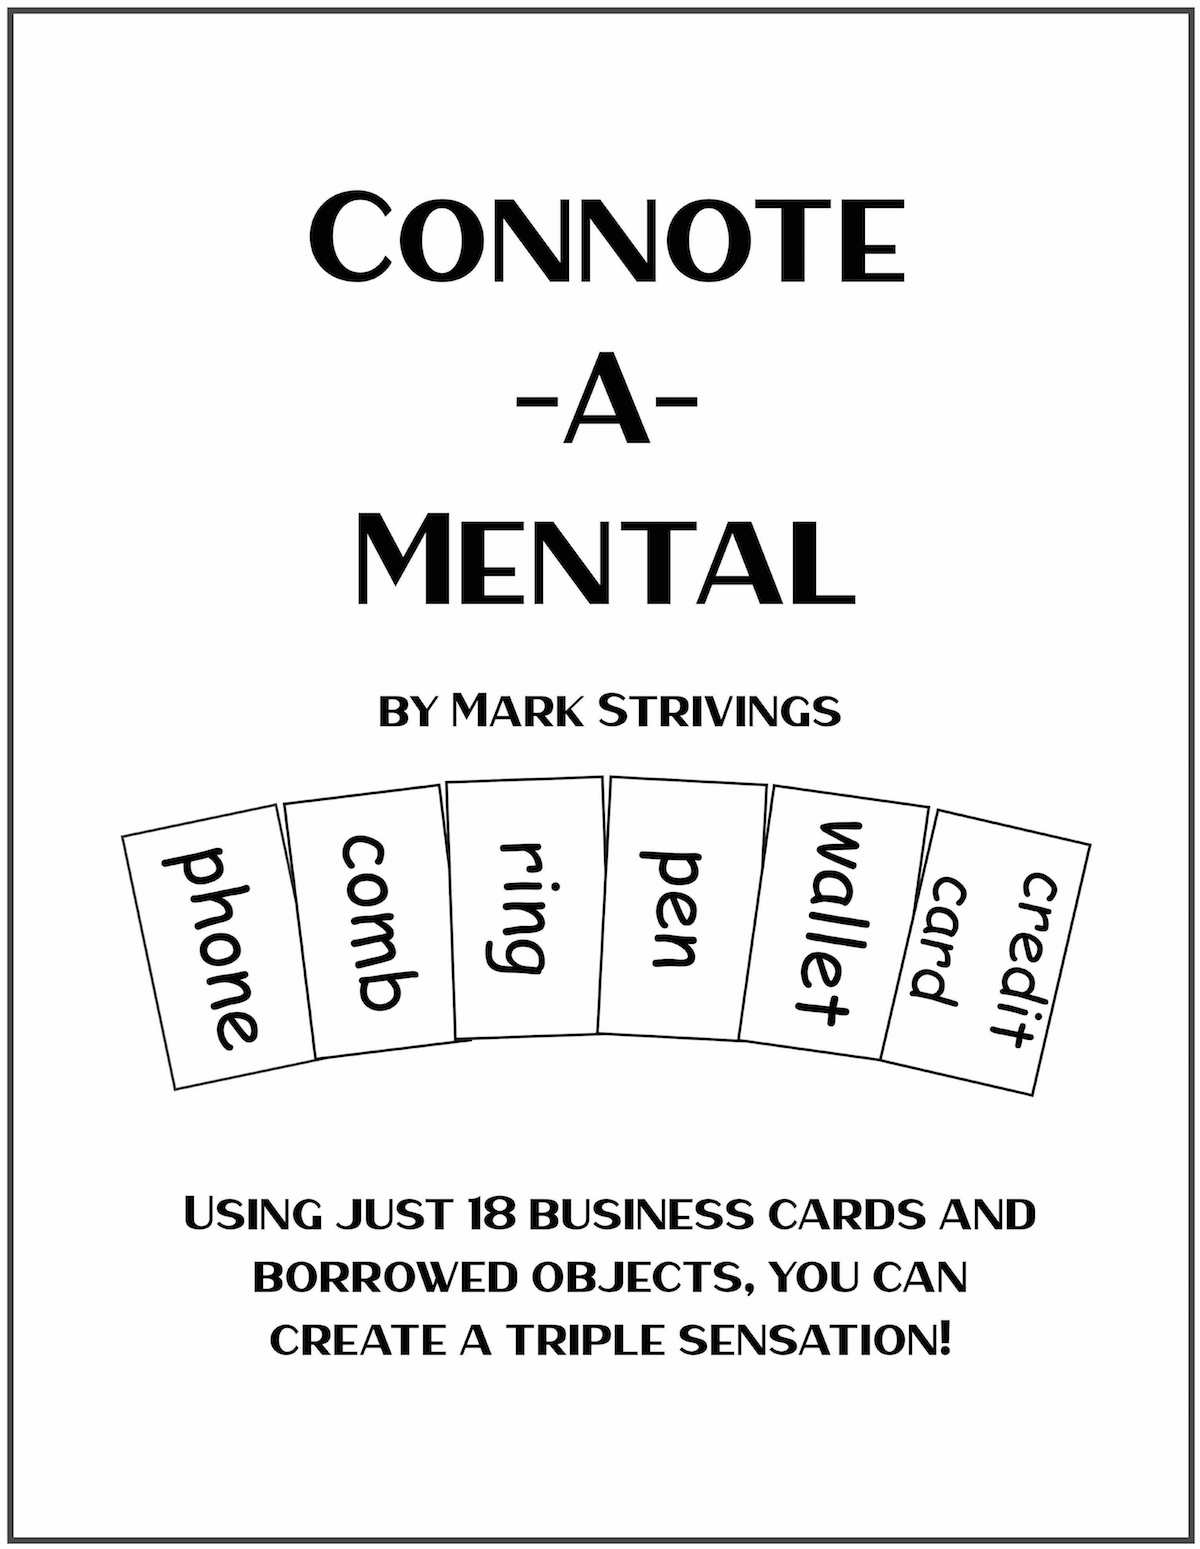 Mark Strivings - Connote-A-Mental